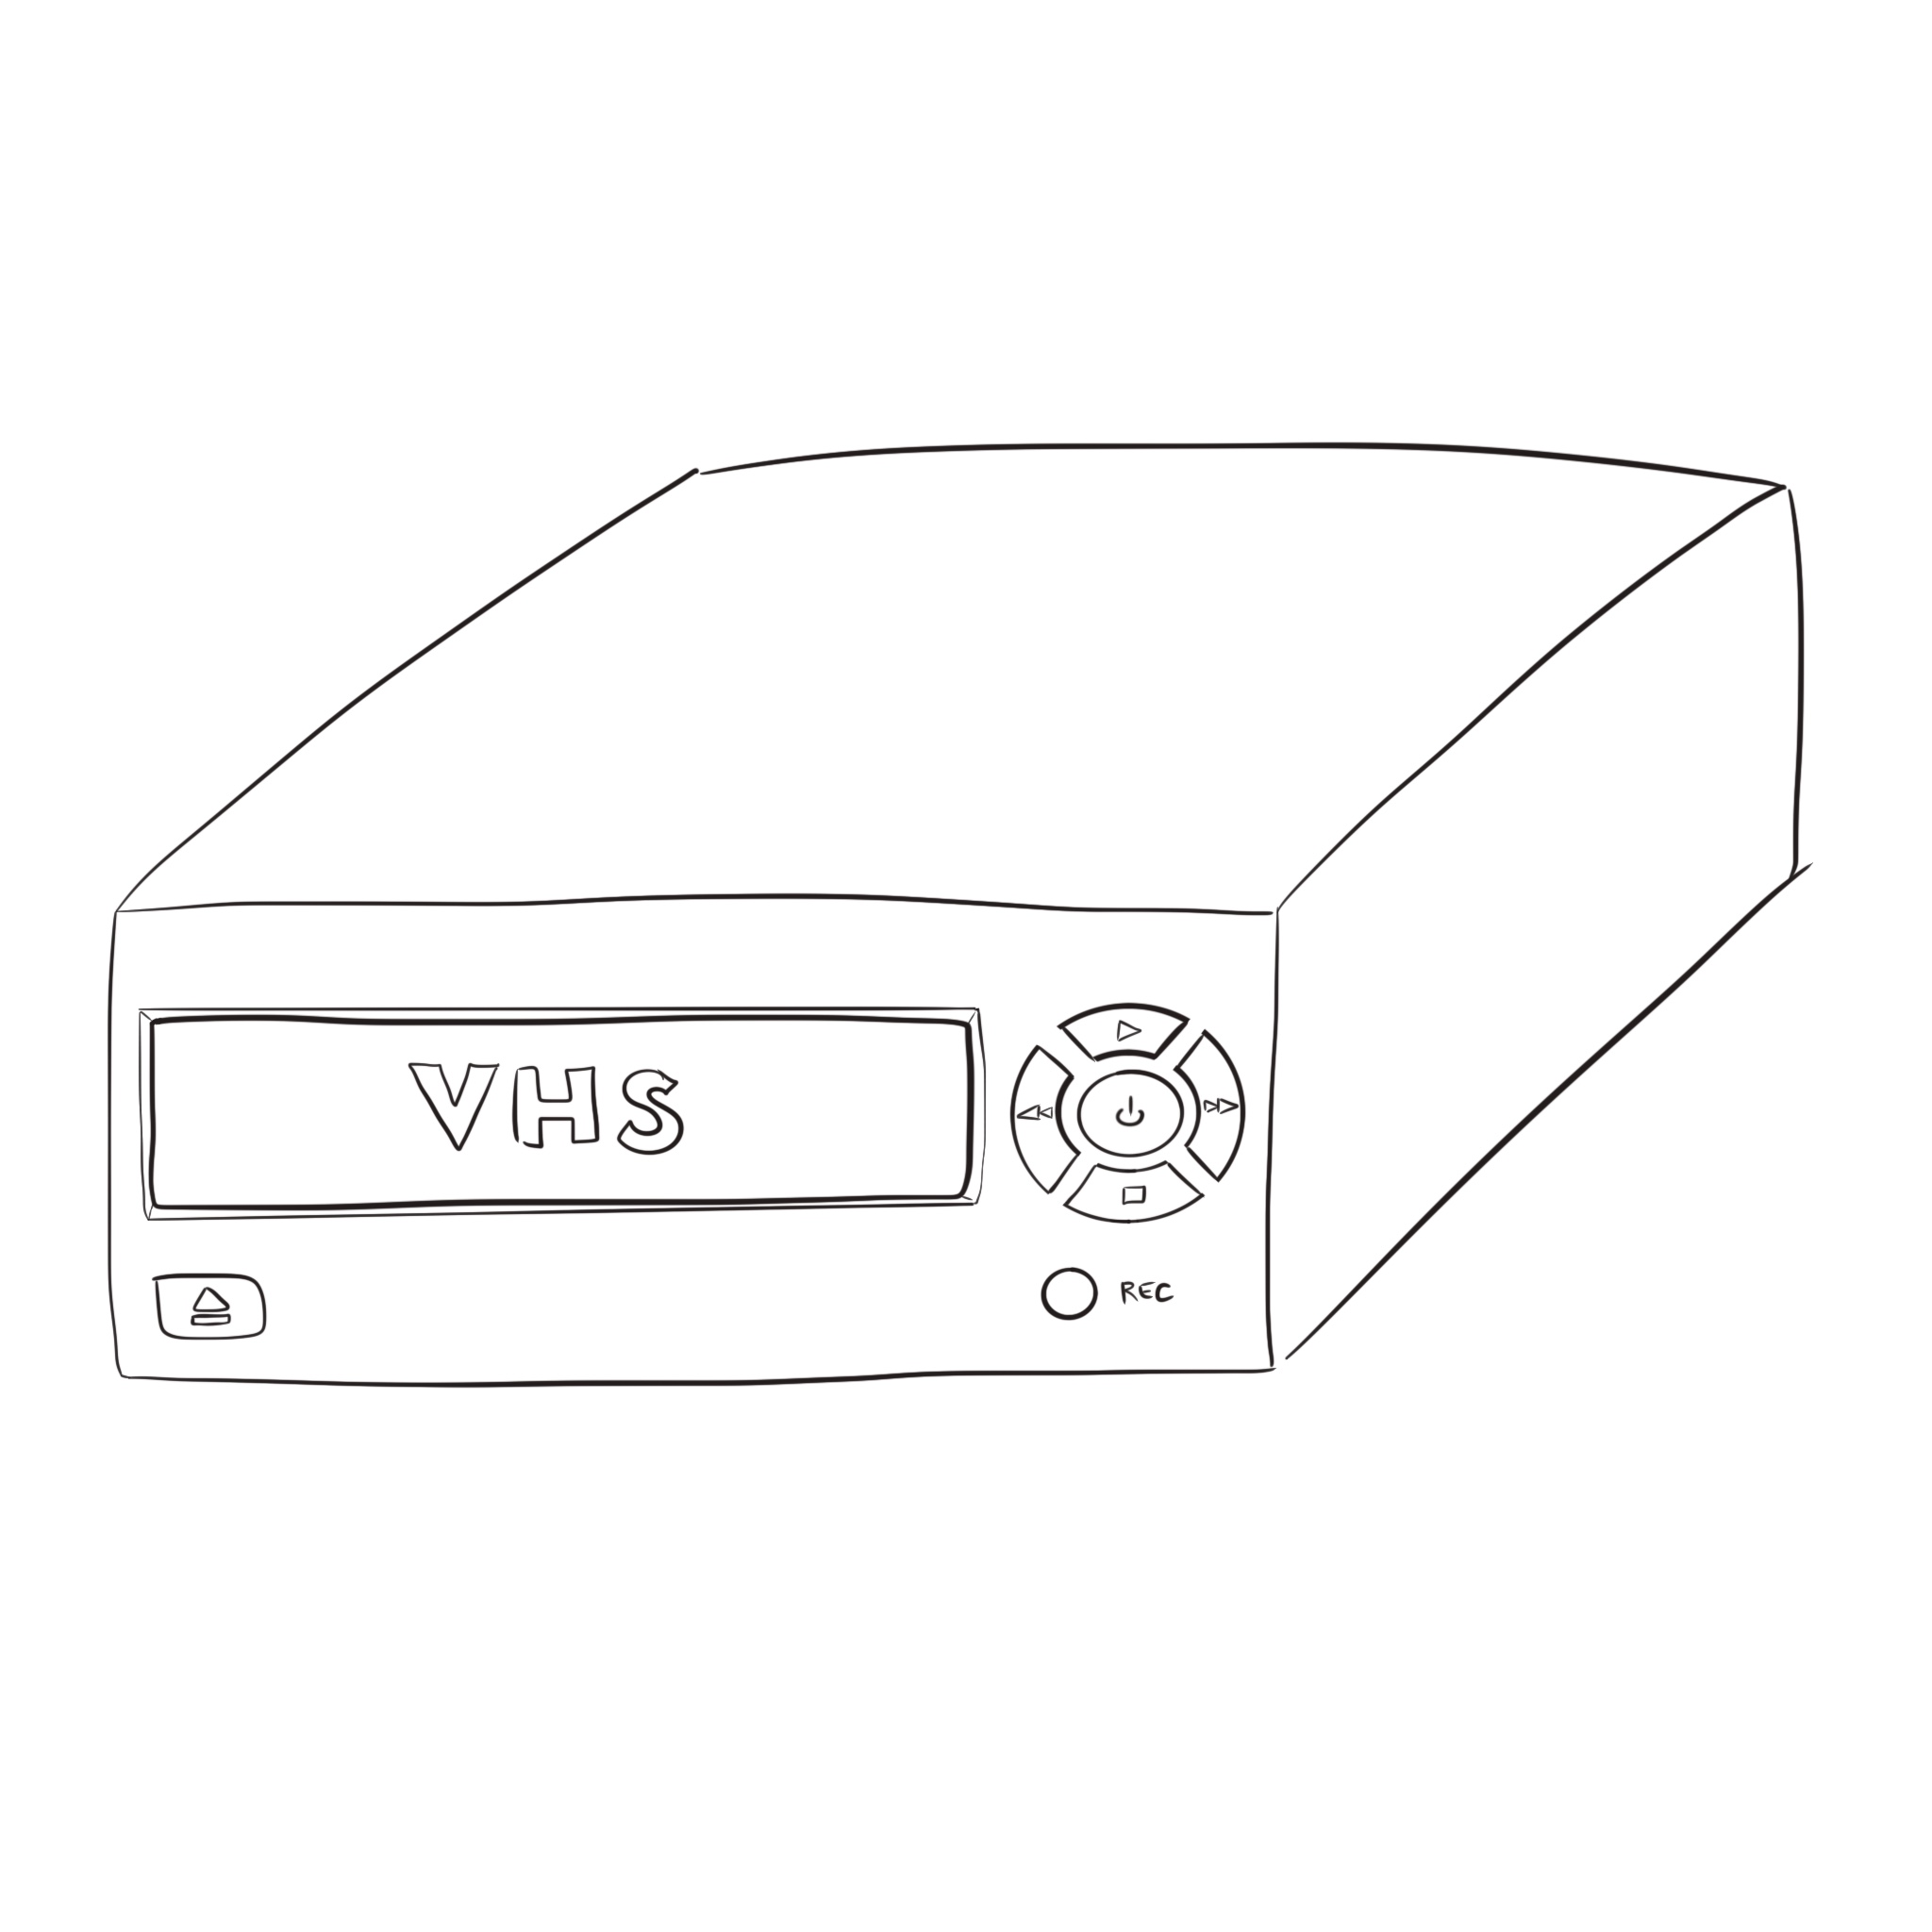 Drawing of a VCR